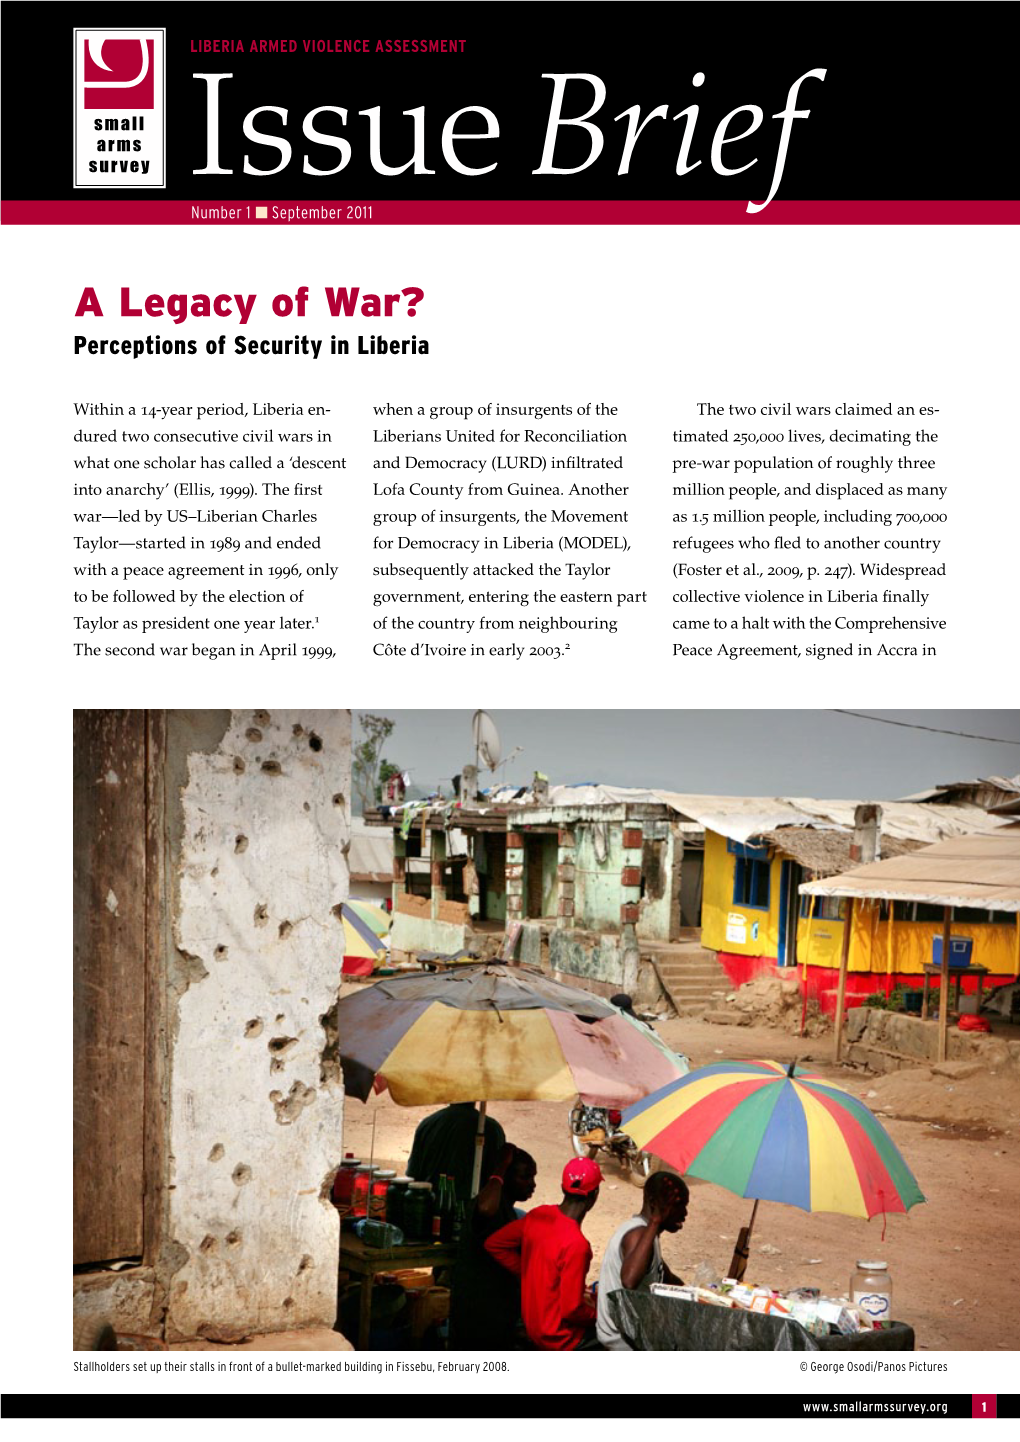 A Legacy of War? Perceptions of Security in Liberia